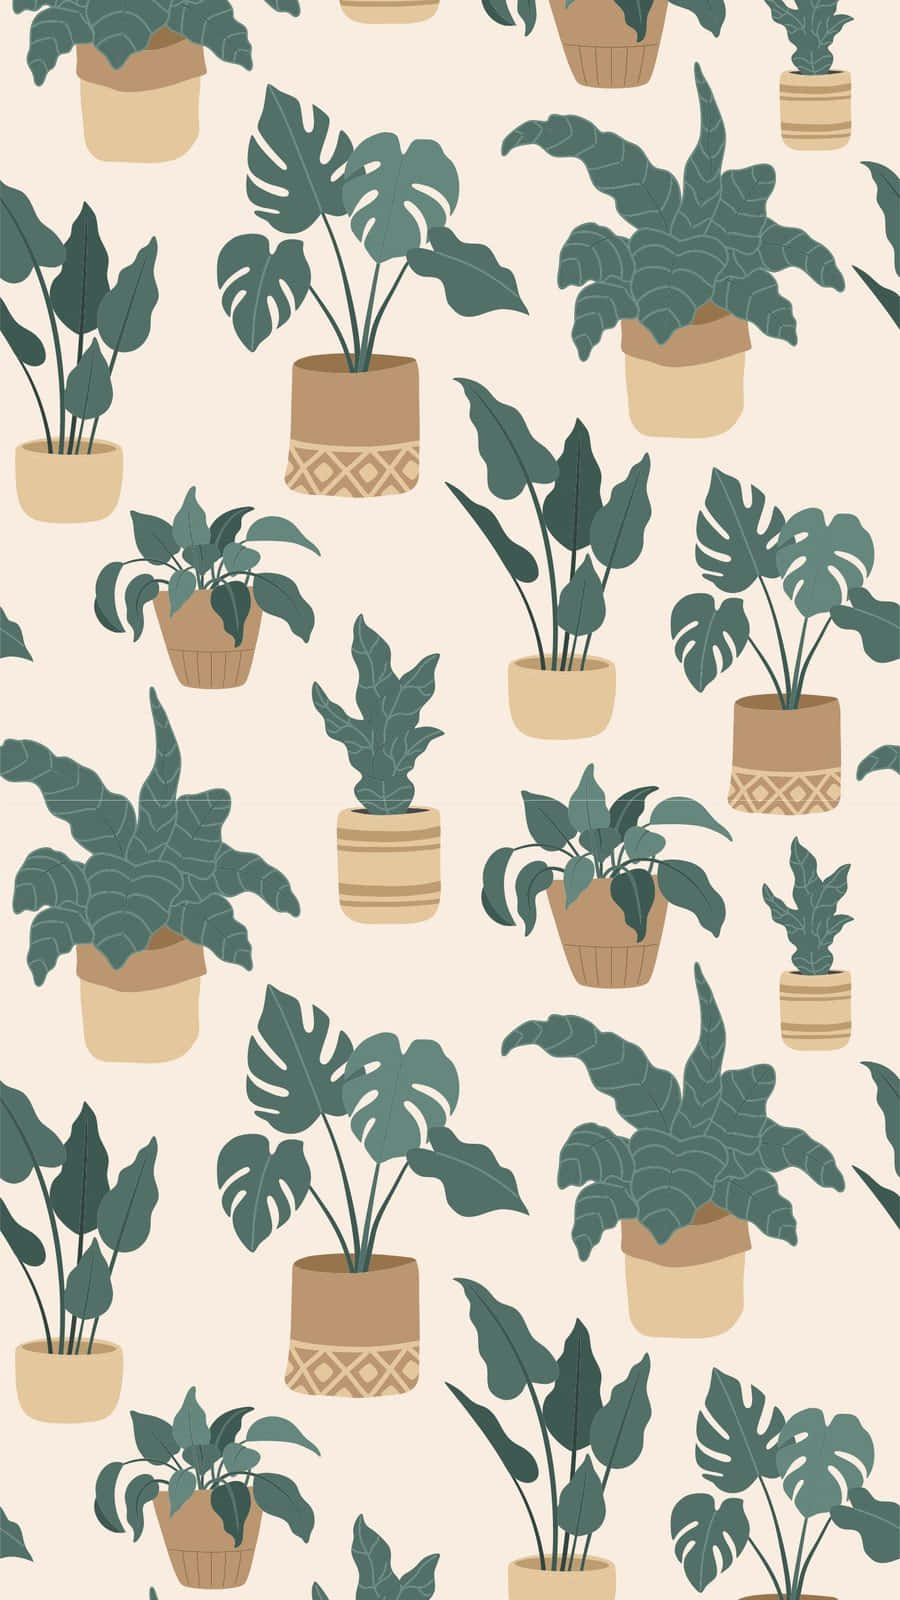 The Future of Phone is Here with Plant Phone Wallpaper